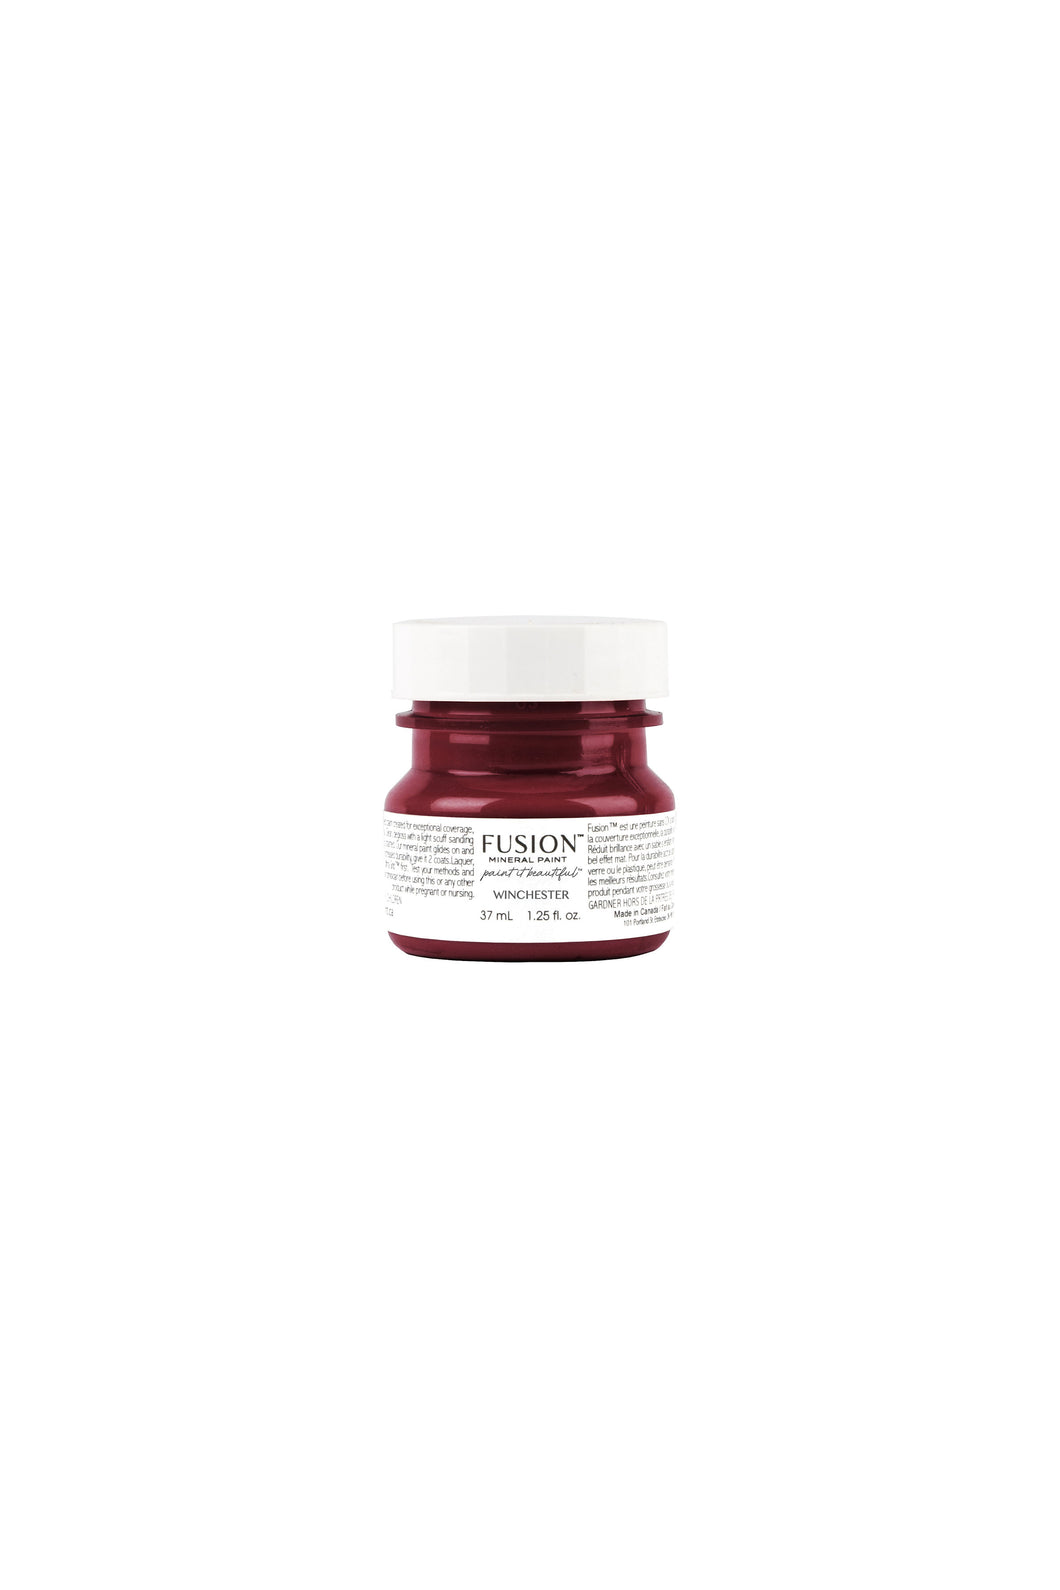 Fusion Mineral Paint - Winchester 37 ml Jar